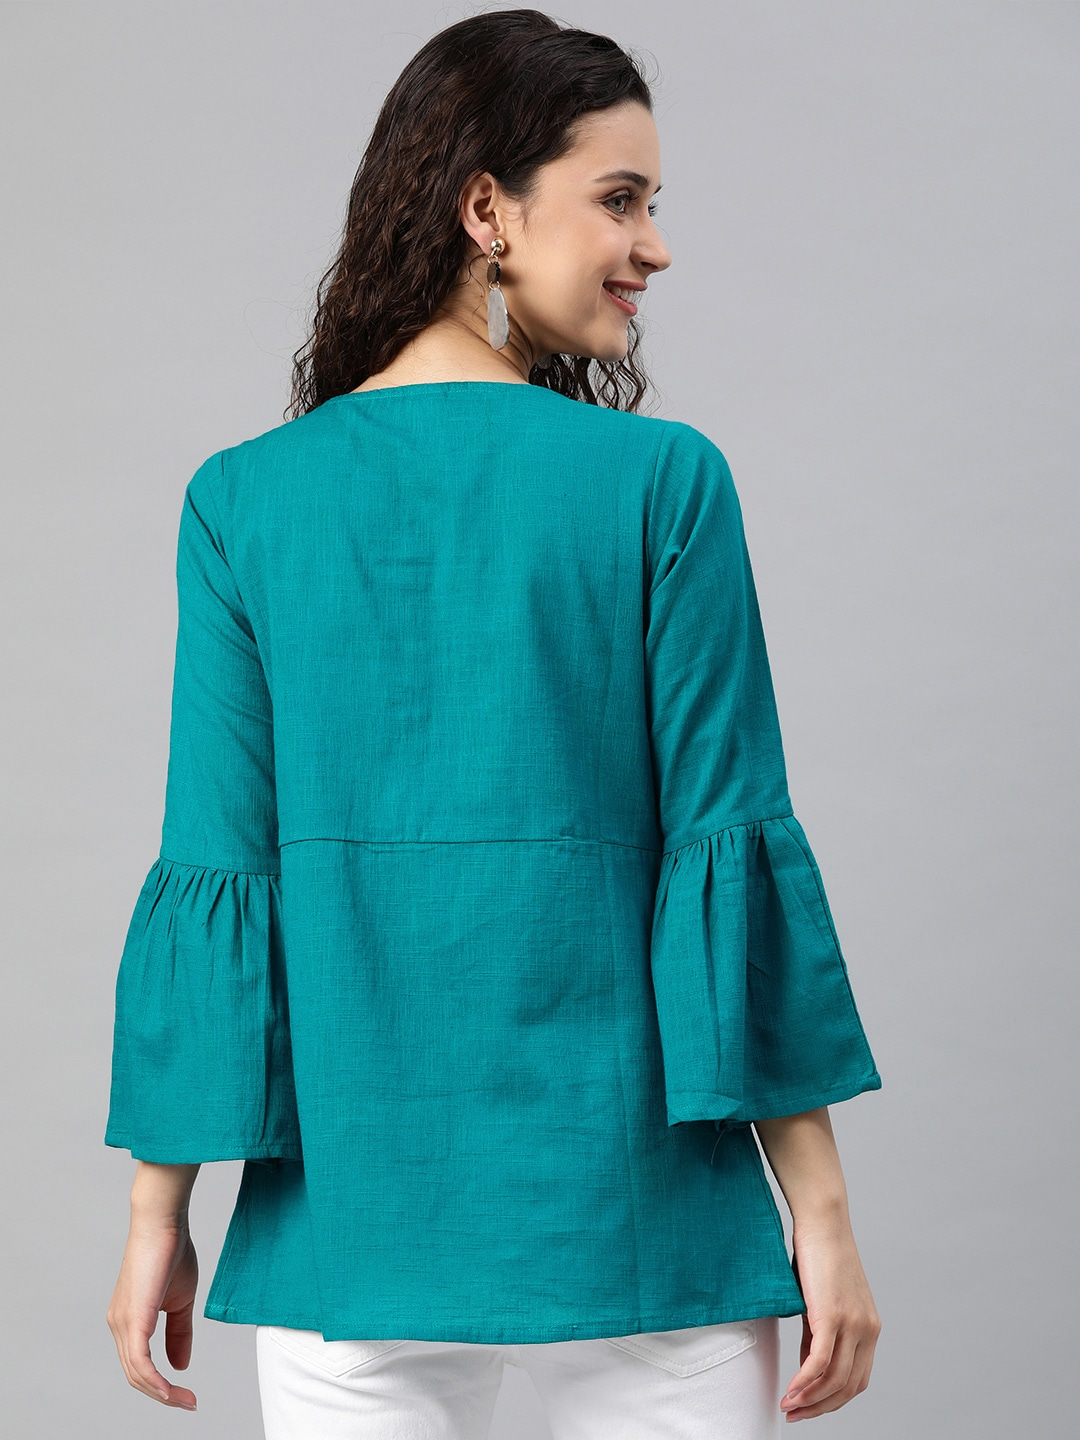 Women Teal Blue Solid Top